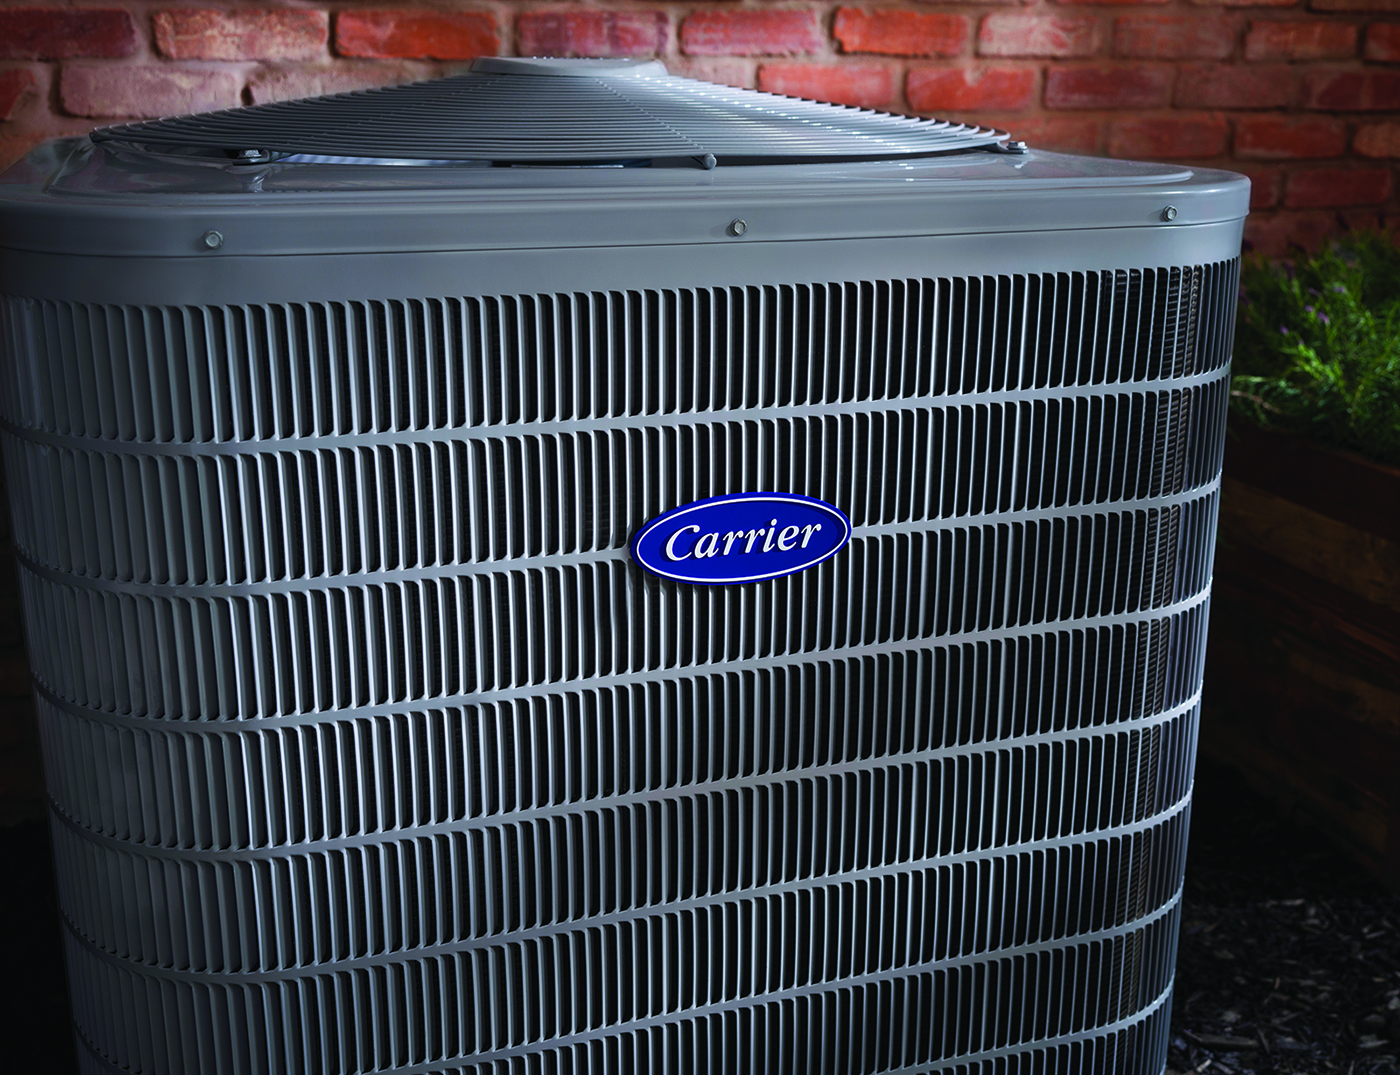 a carrier centralized air conditioning unit, a major part of a central air conditioning system